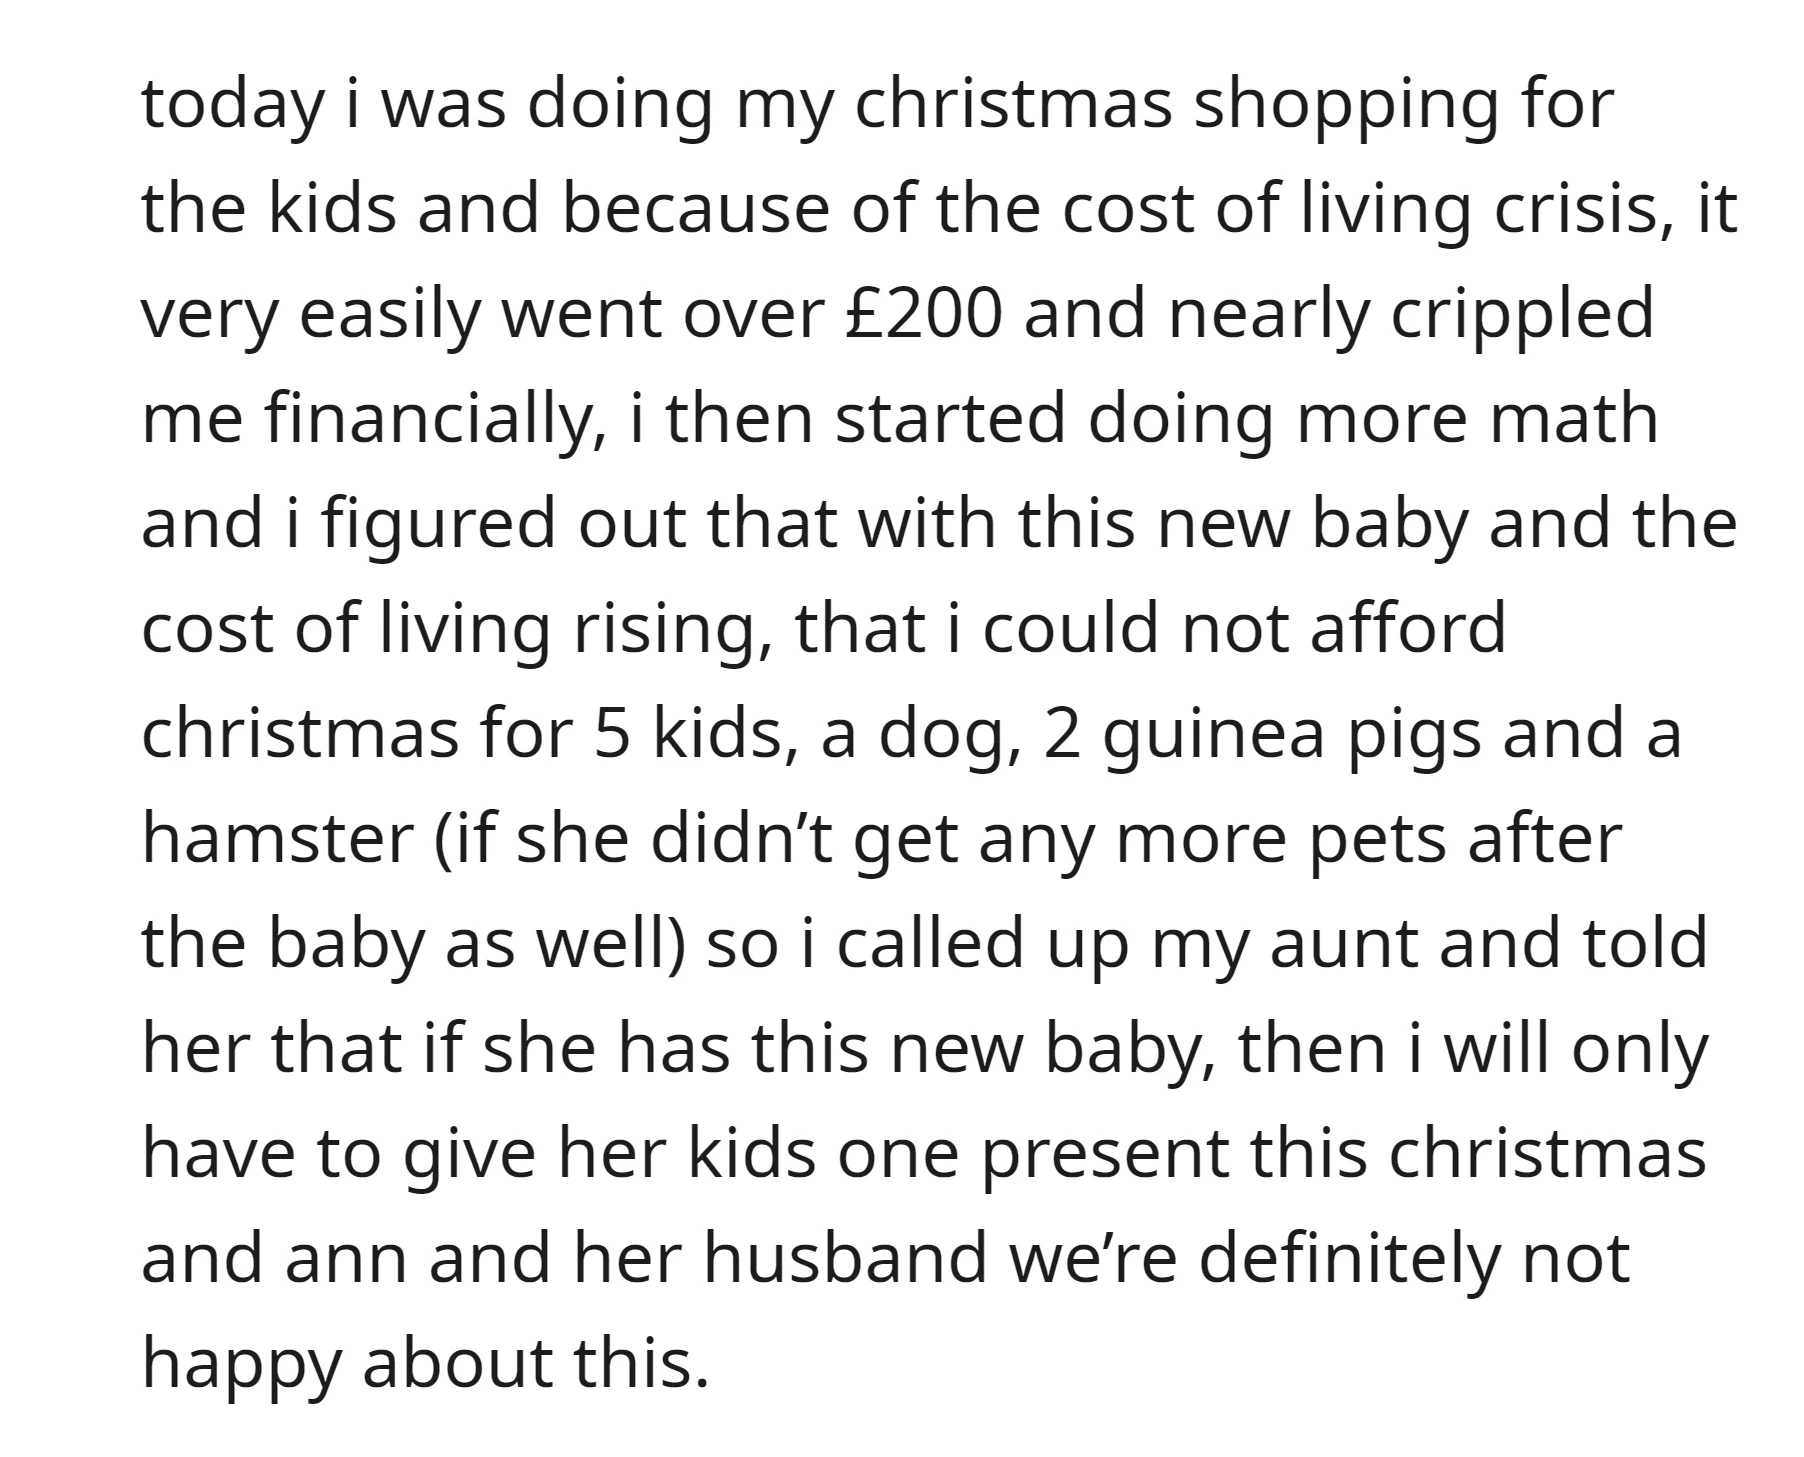 OP could only afford to give one present to her five kids